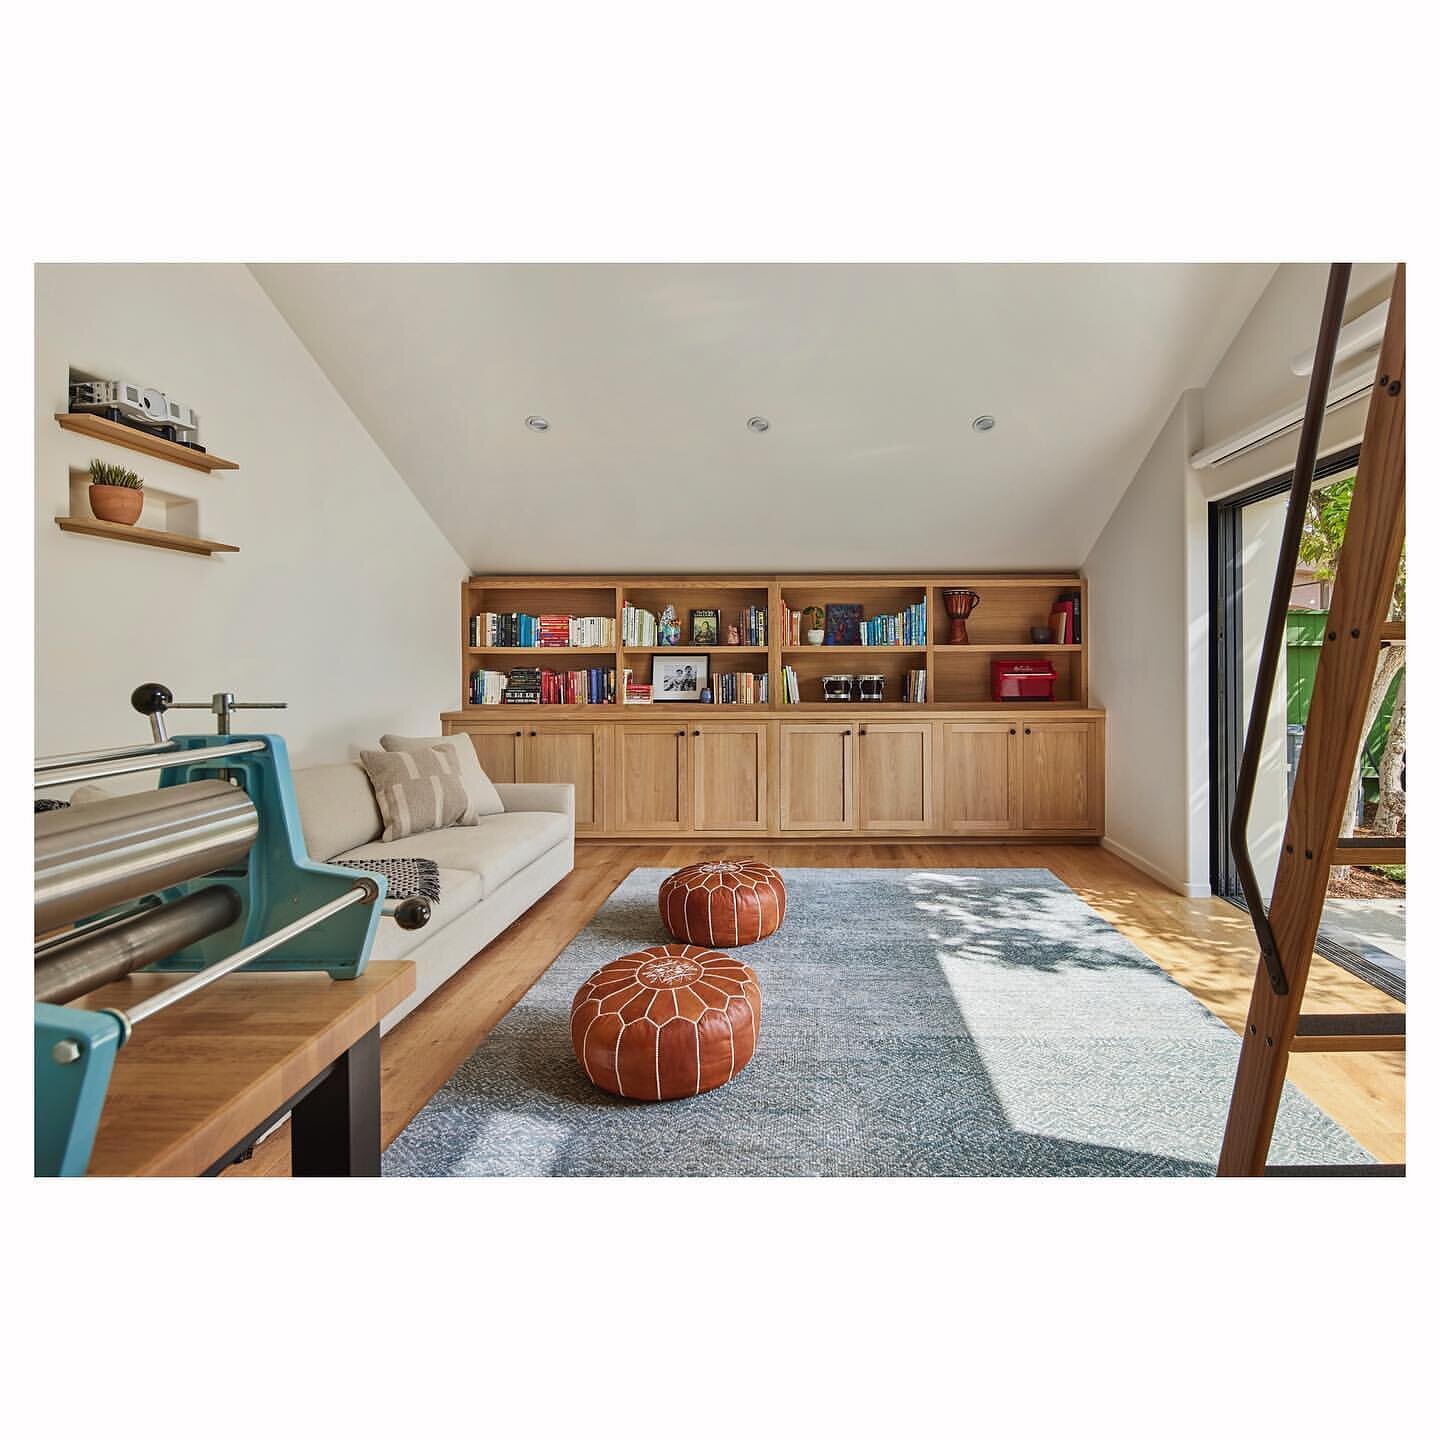 R A N C H O  H I G U E R A  A D U
The Craftsman-inspired accessory dwelling unit with loft in Culver City by @hsumccullough was just featured in @latimes ✨
Thank you to our wonderful clients entrusting us to return 6 years after finishing the additio